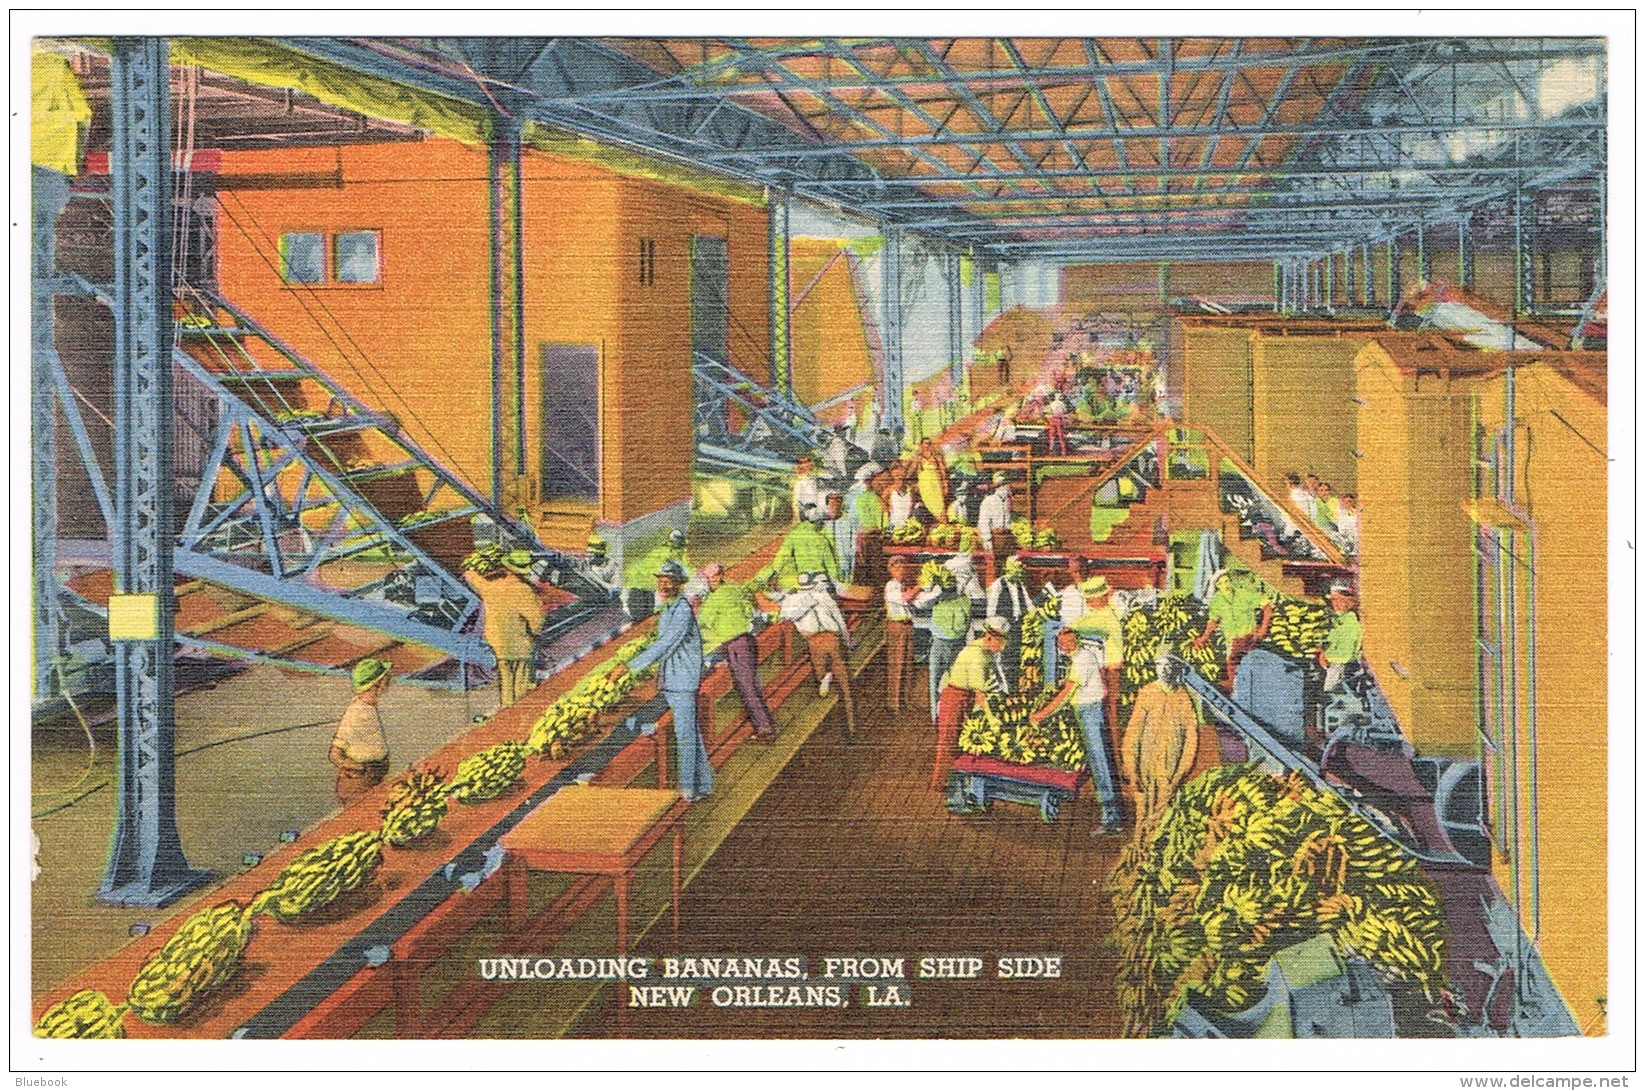 RB 1135 - Early USA Postcard - Unloading Bananas From Ship Side New Orleans Louisiana - Food Theme - New Orleans